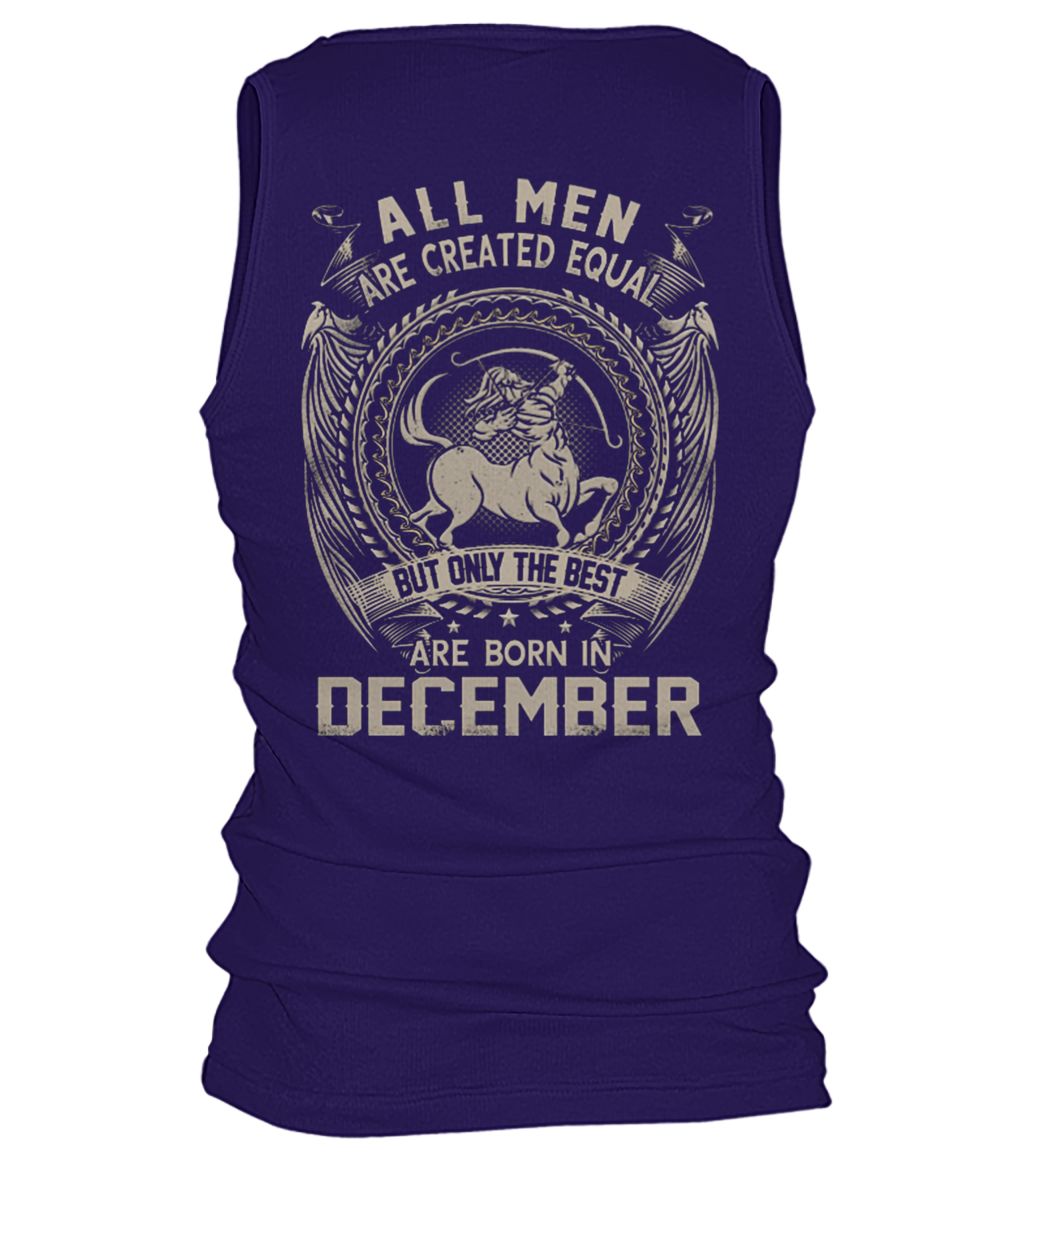 All men created equal but the best are born in december men's tank top